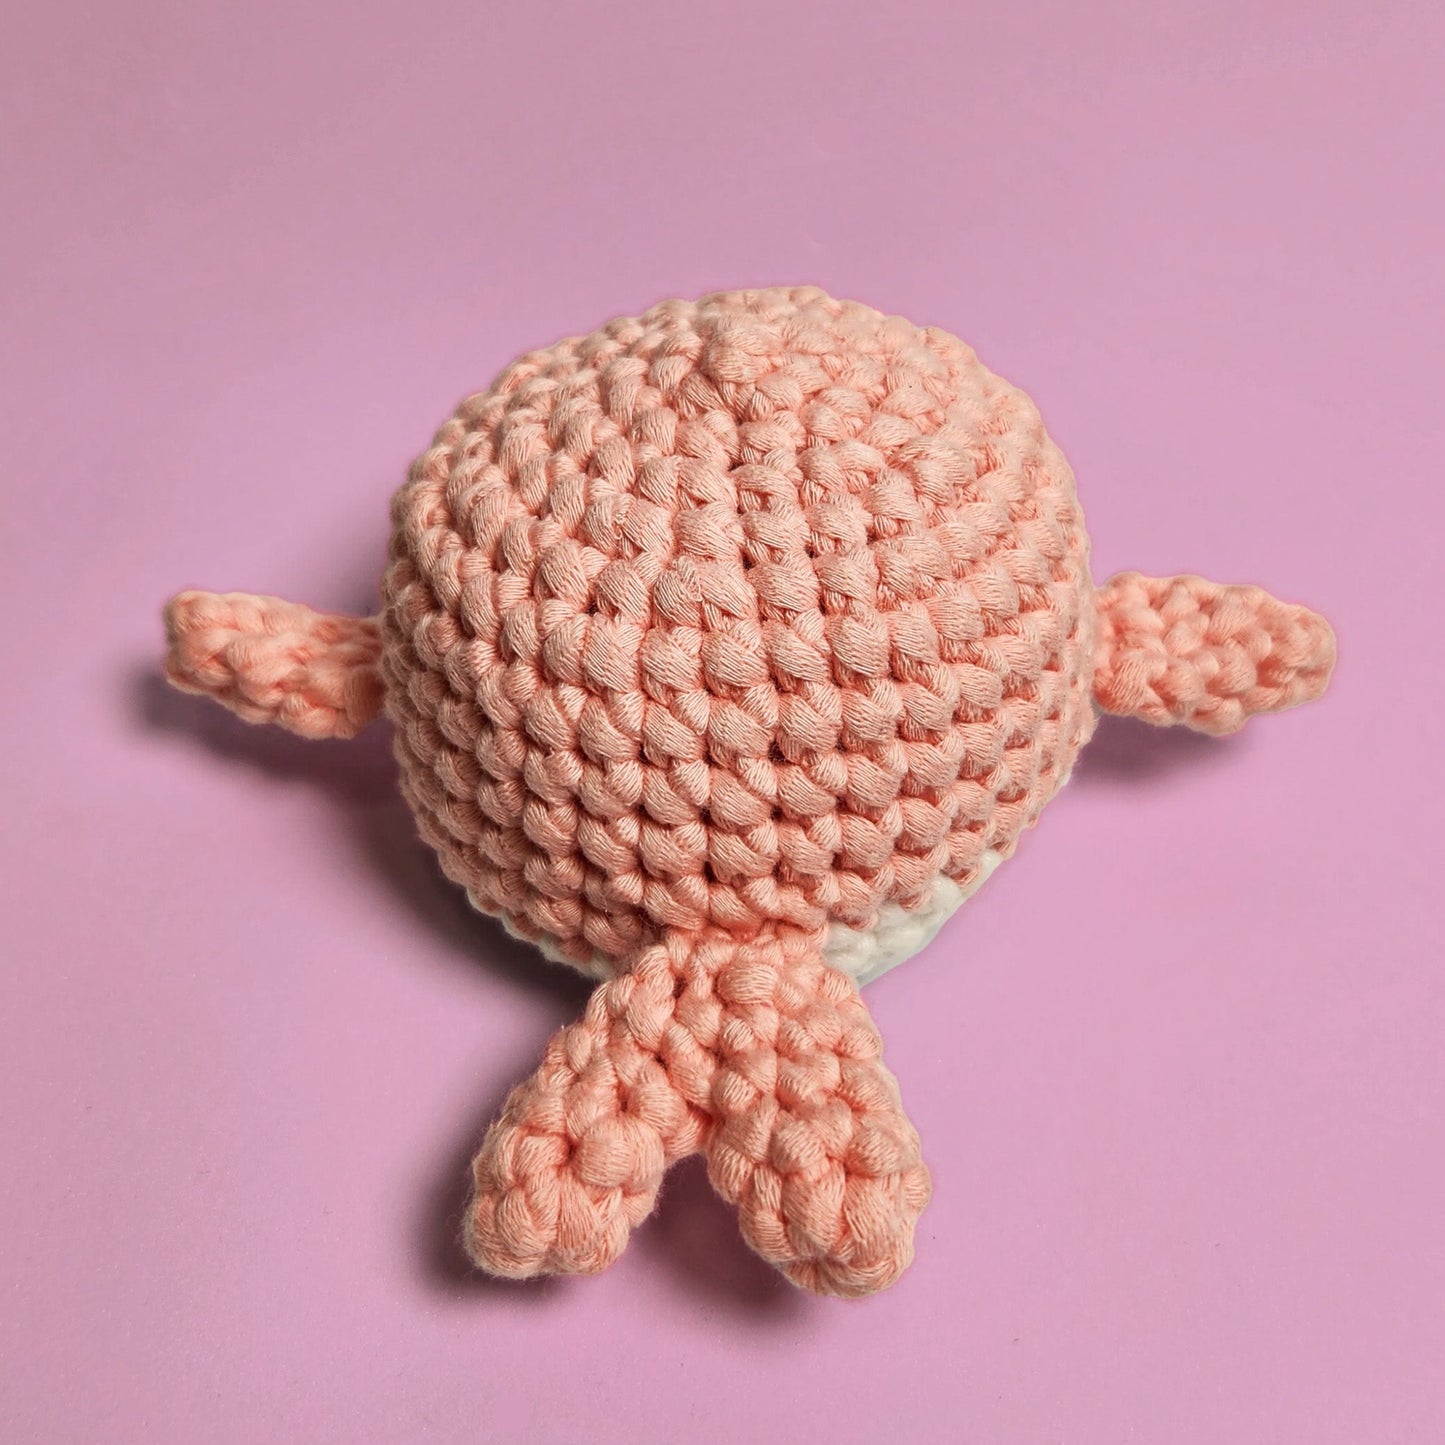 Pink and white amigurumi whale, handcrafted with care and attention to detail. Made from our beginner-friendly crochet kit, perfect for those new to crocheting. Back view.